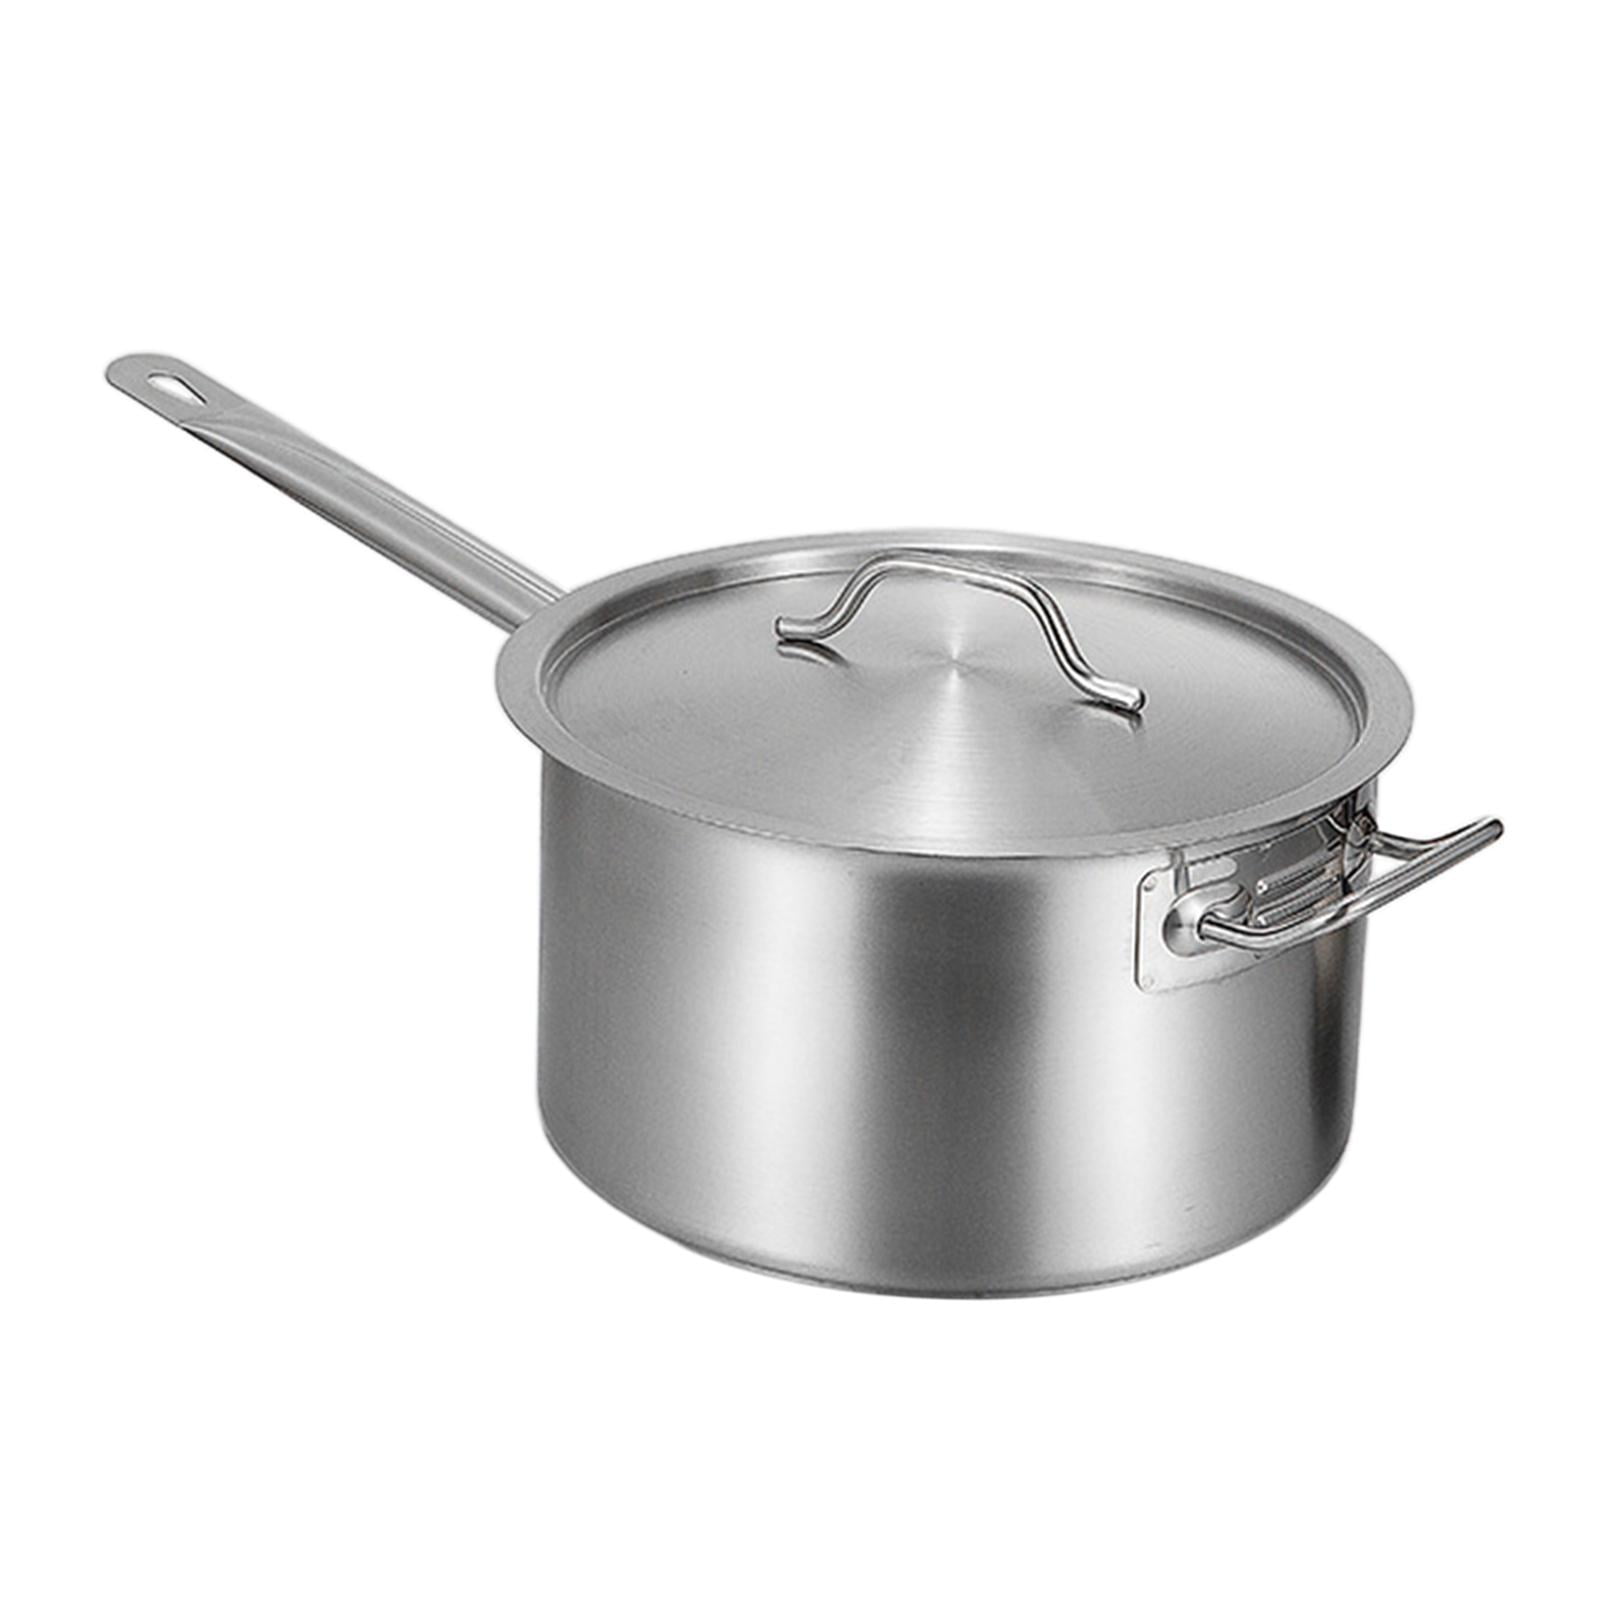 Stainless Steel Saucepan with Glass Lid, 2.0 Quart Multipurpose Sauce Pan,  Sauce Pot with for Easy Pour with Ergonomic Handle